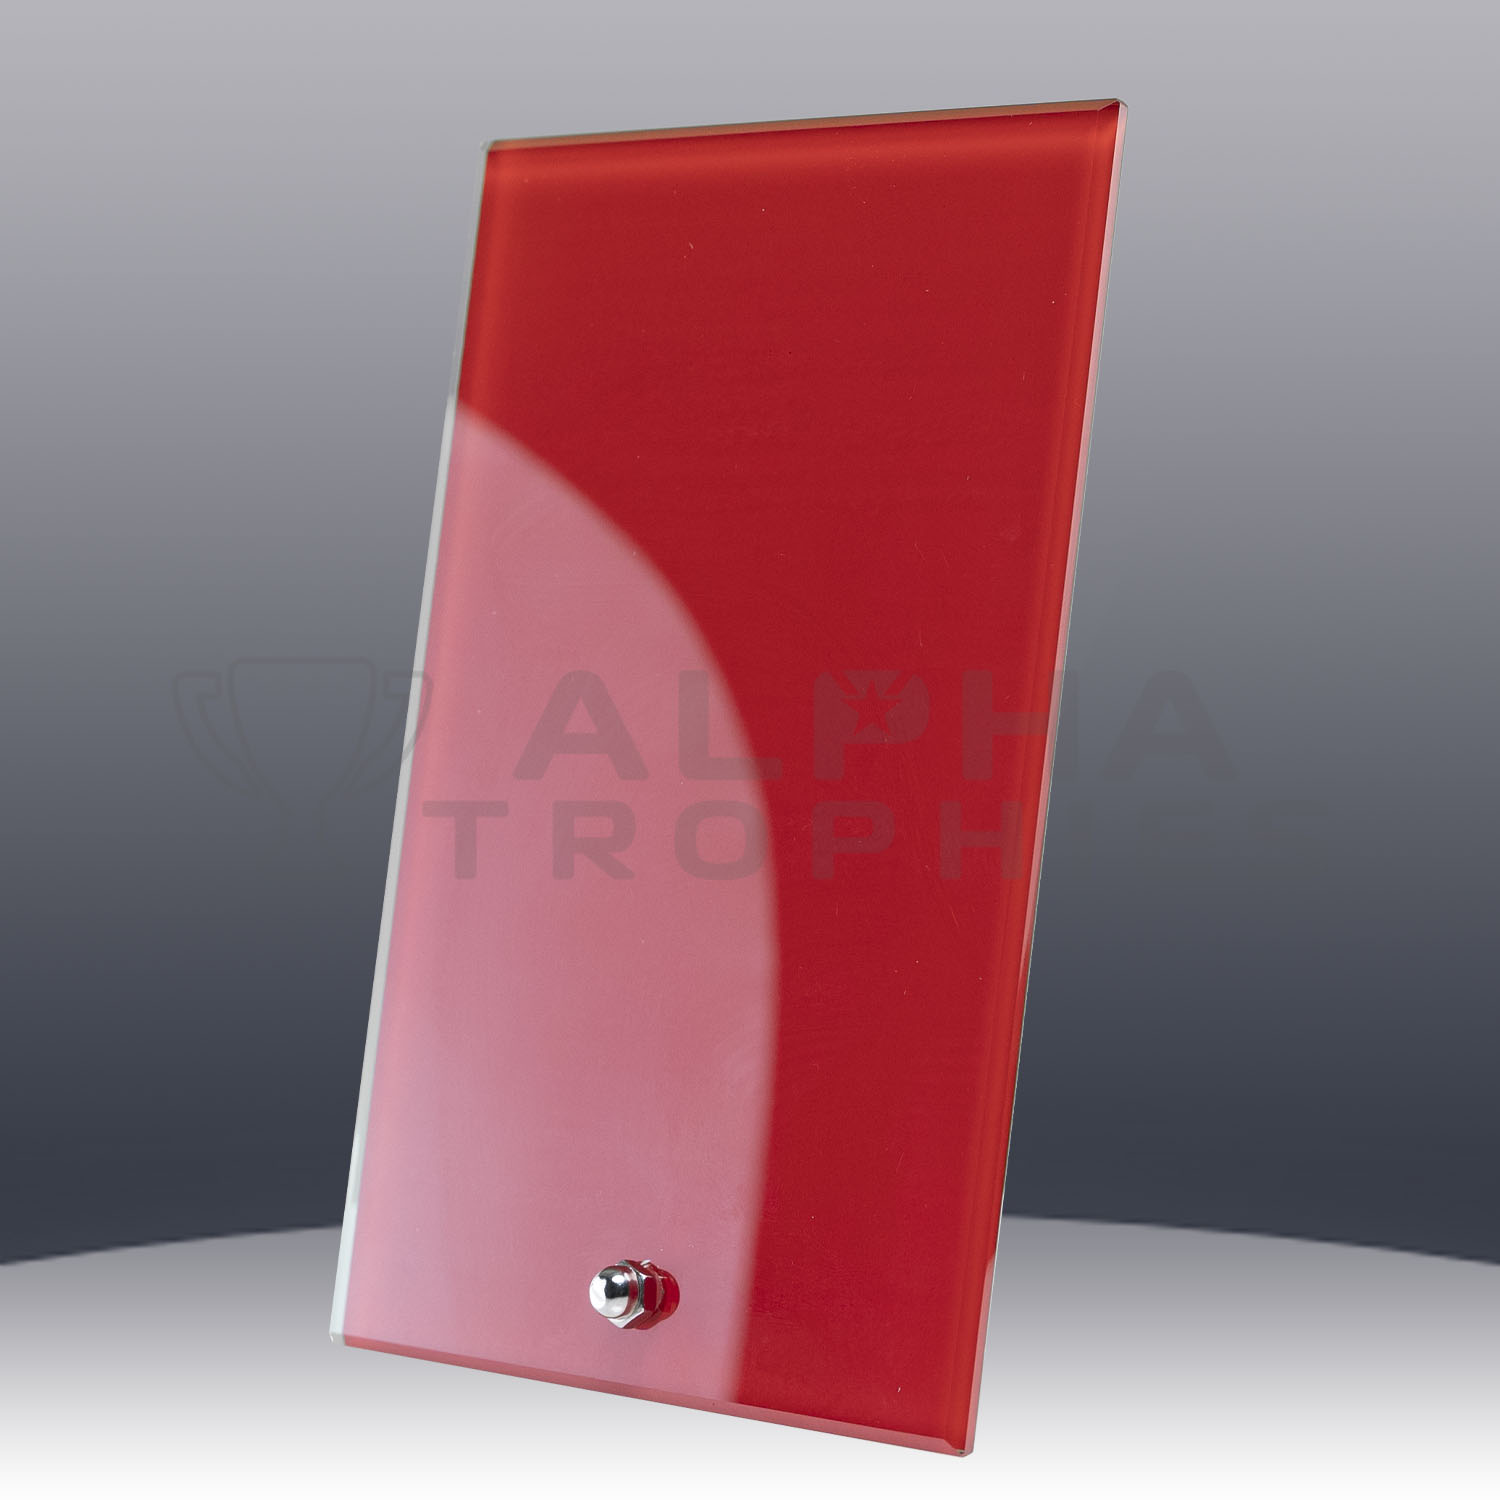 laser-glass-rectangle-red-1268-1r-side